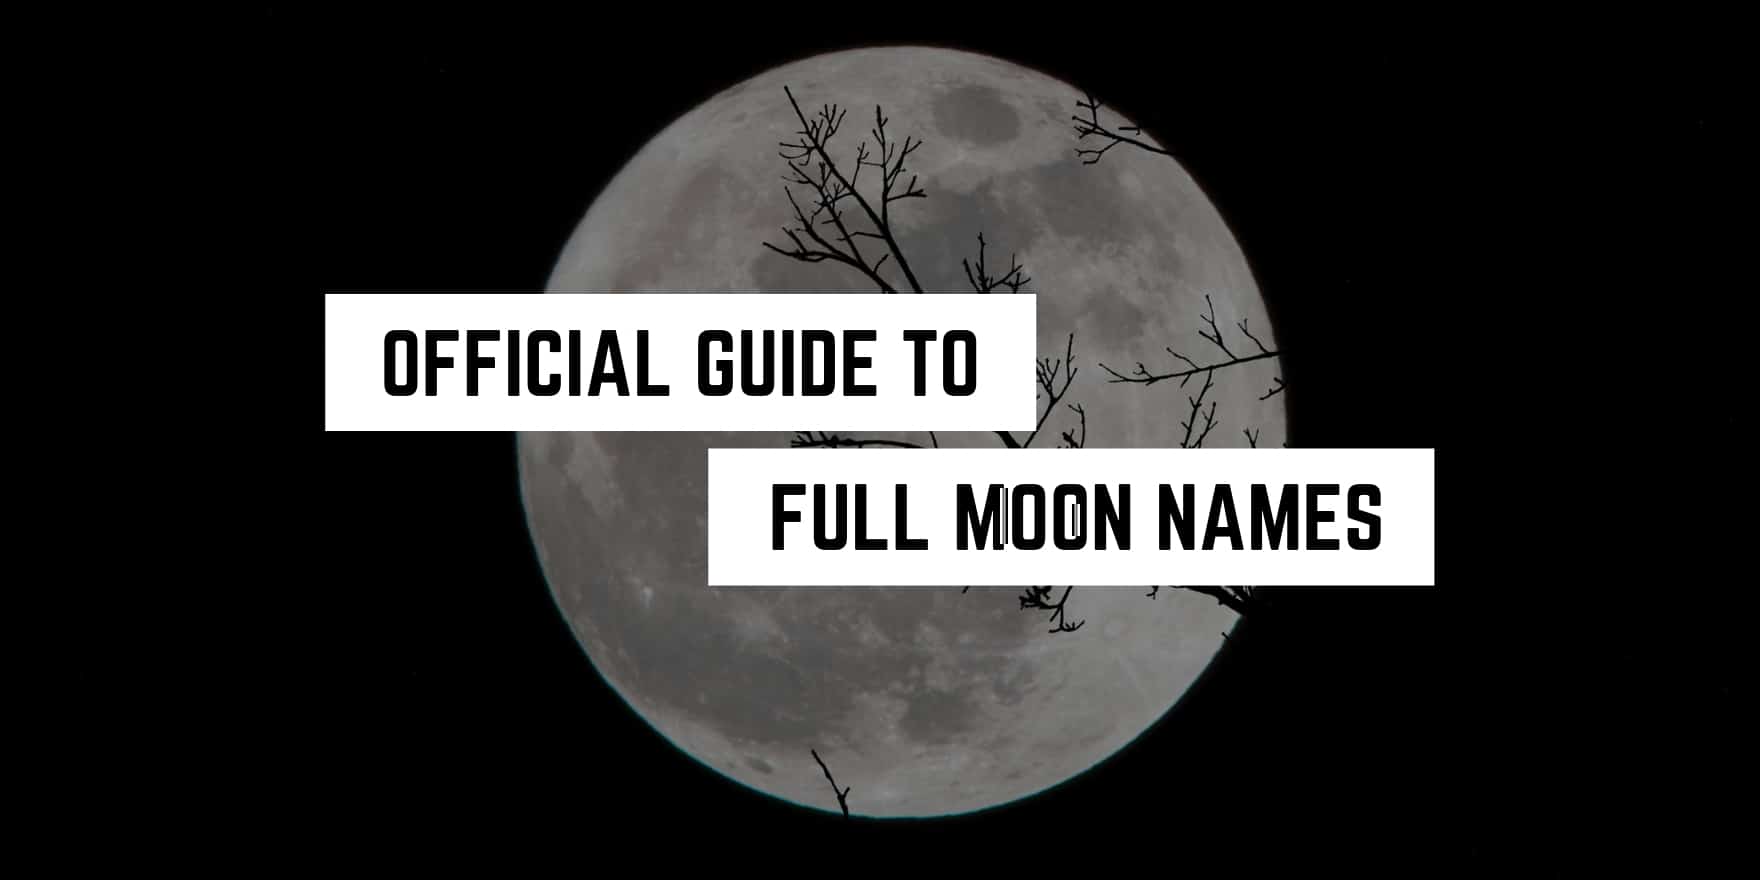 Silhouetted branches against a luminous full moon: exploring the origins and meanings behind traditional full moon names through a spiritual lens.